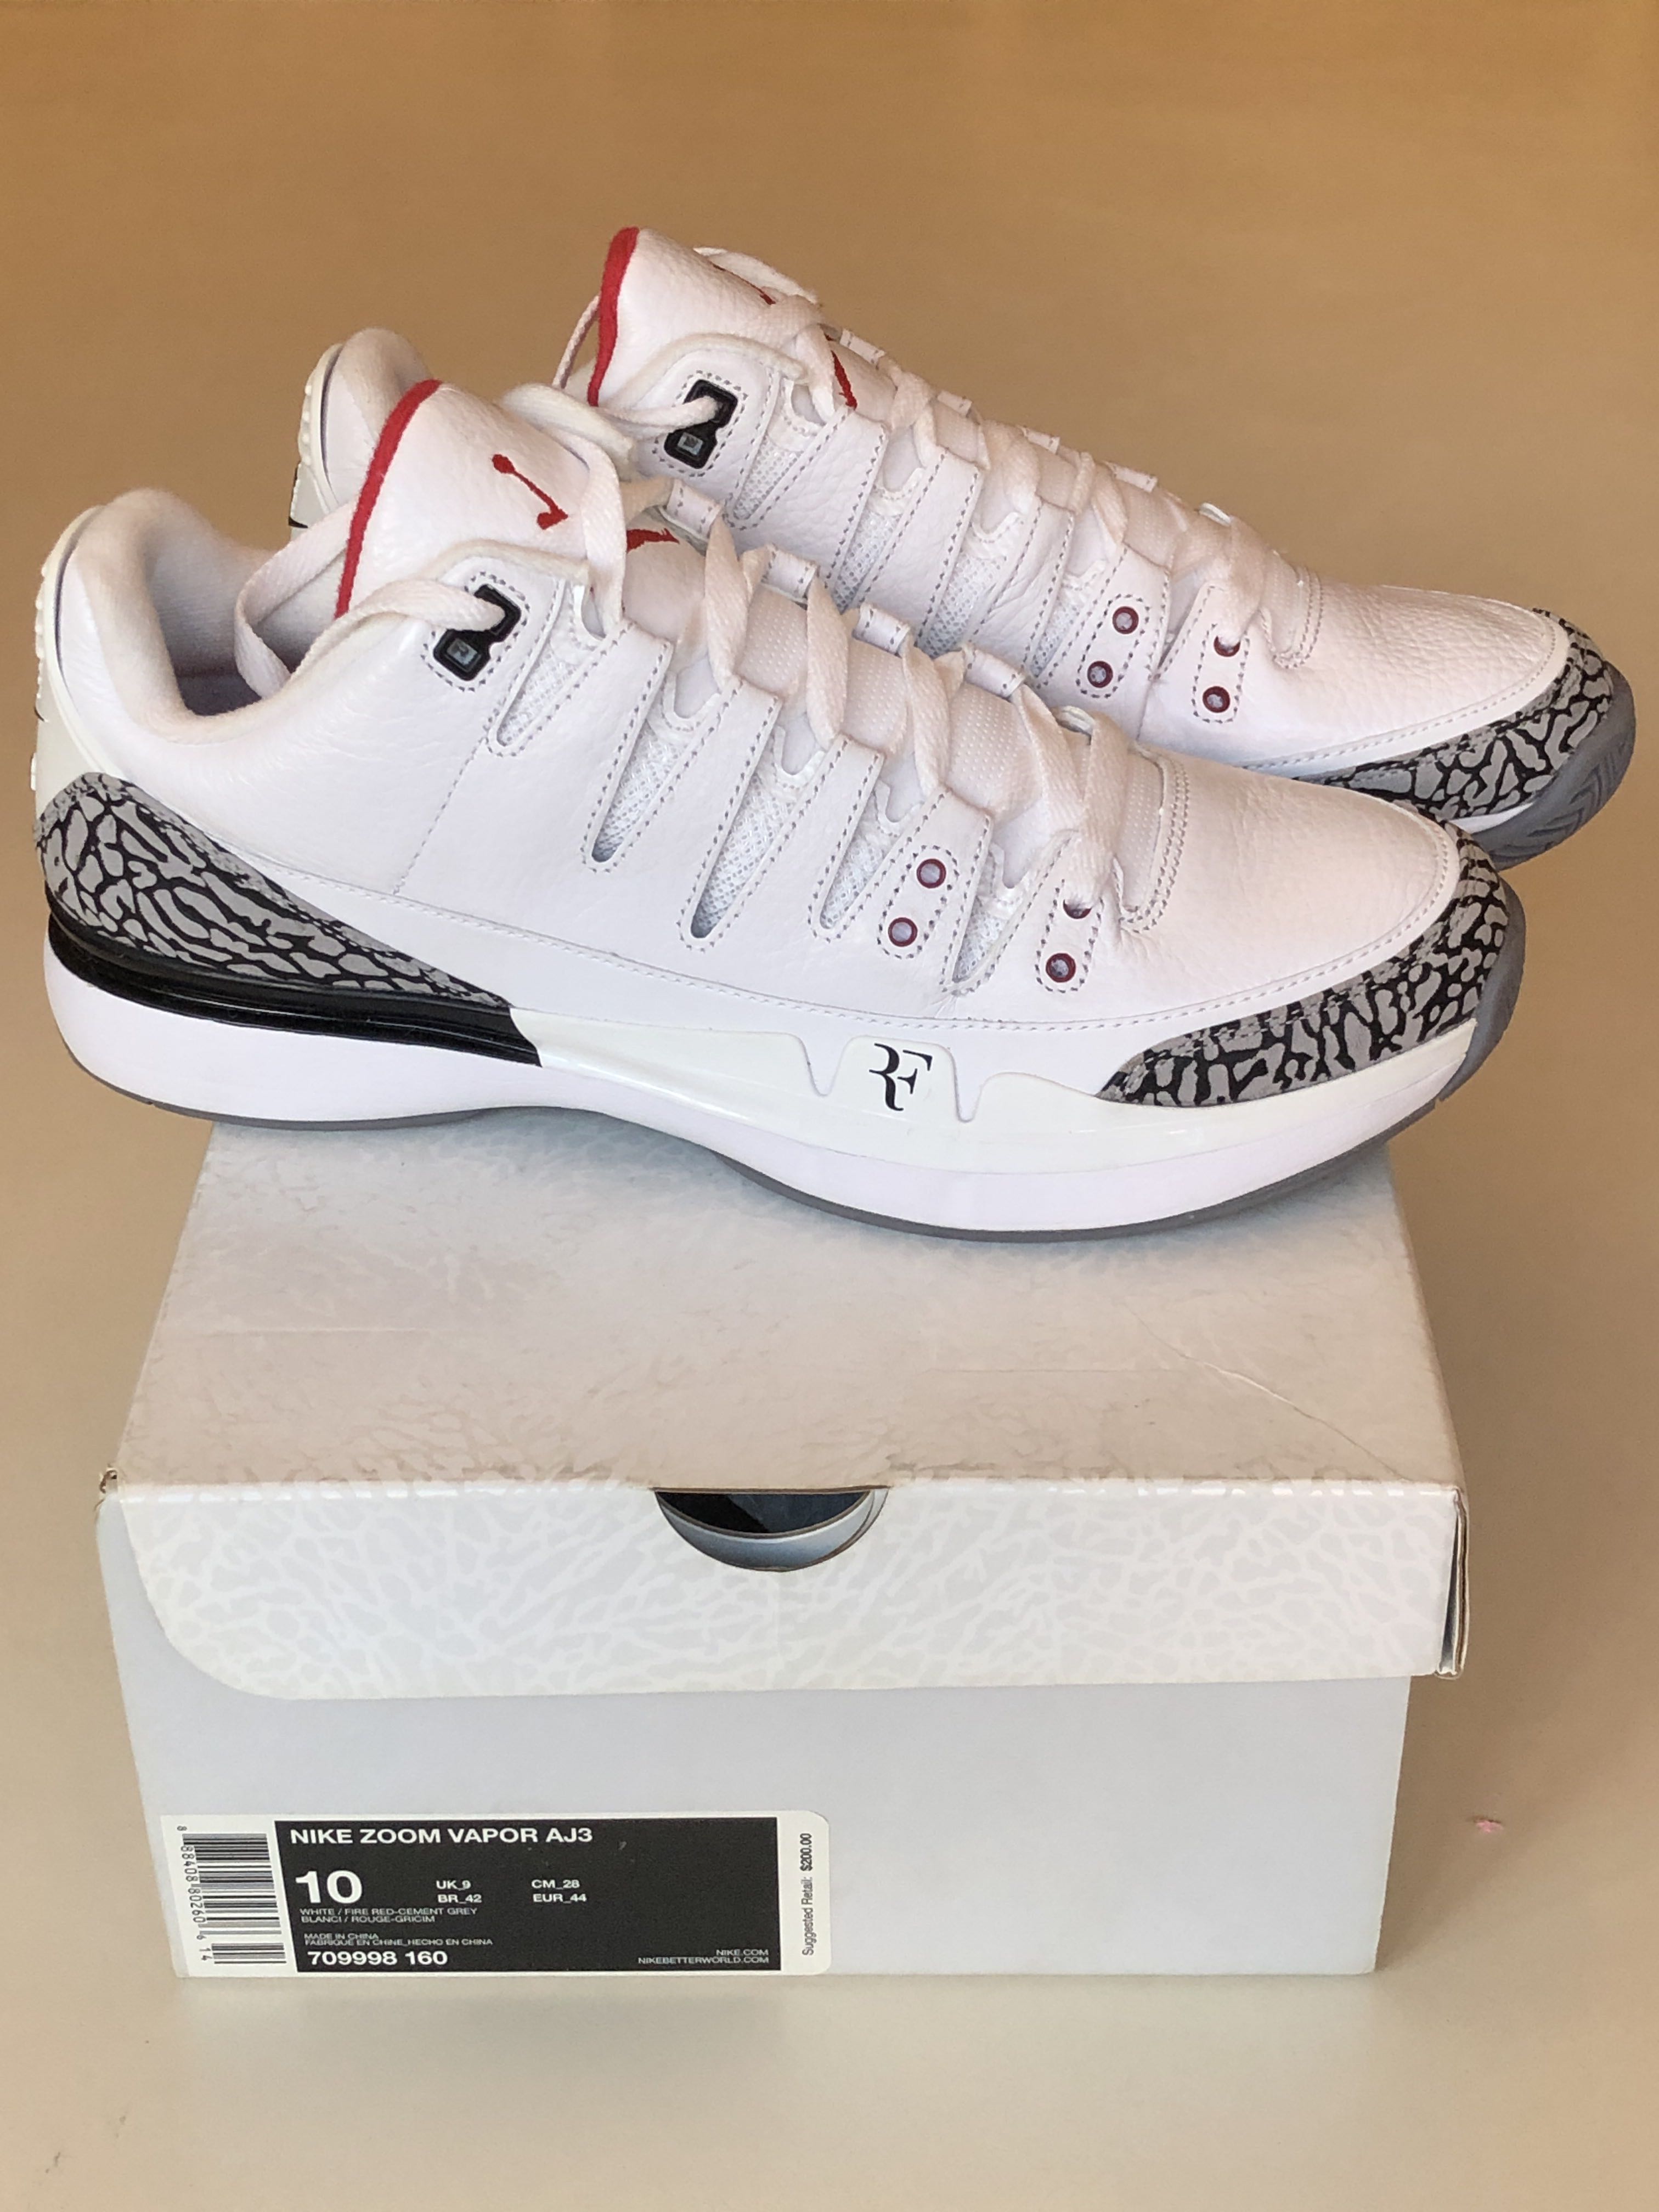 shoulder Imminent Insightful Original Nike Zoom Vapor AJ3 Roger Federer Tennis Shoes X Air Jordan 3  White Cement Limited Edition Rare Sneakers Brand New in Box, Men's Fashion,  Footwear, Sneakers on Carousell